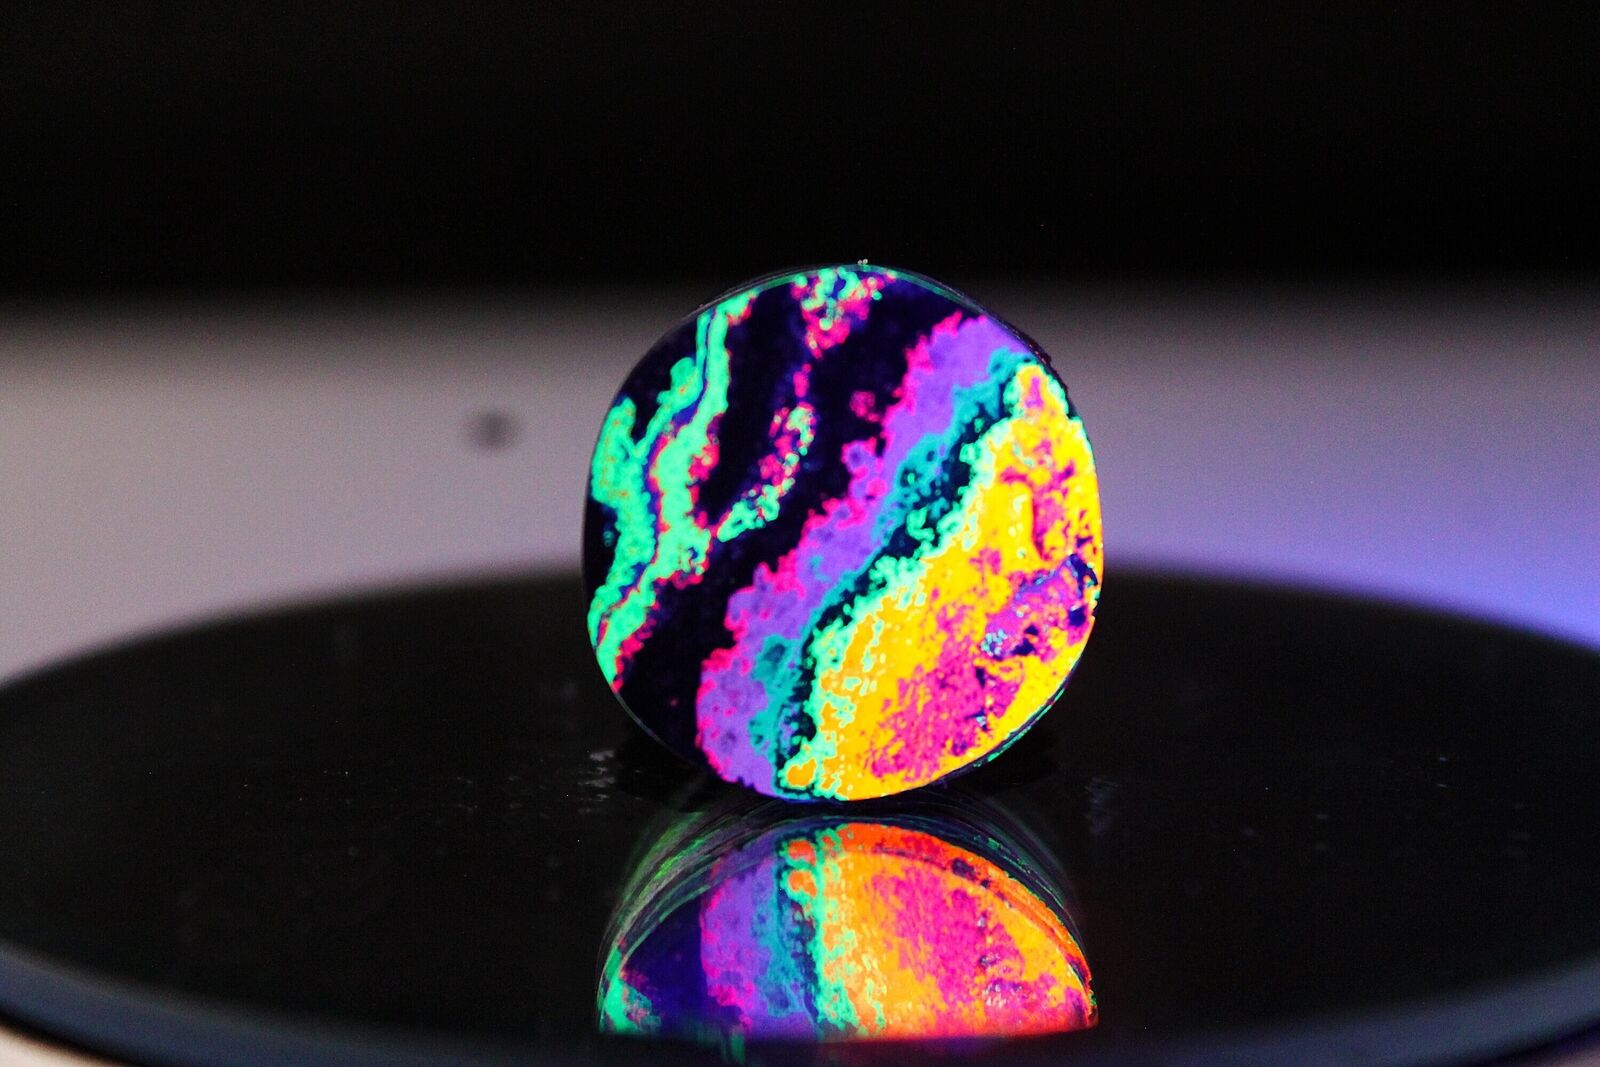 Black Light Stand-Alone Finished Piece of Art - 23.09mm x 23.09mm x 14.76mm    